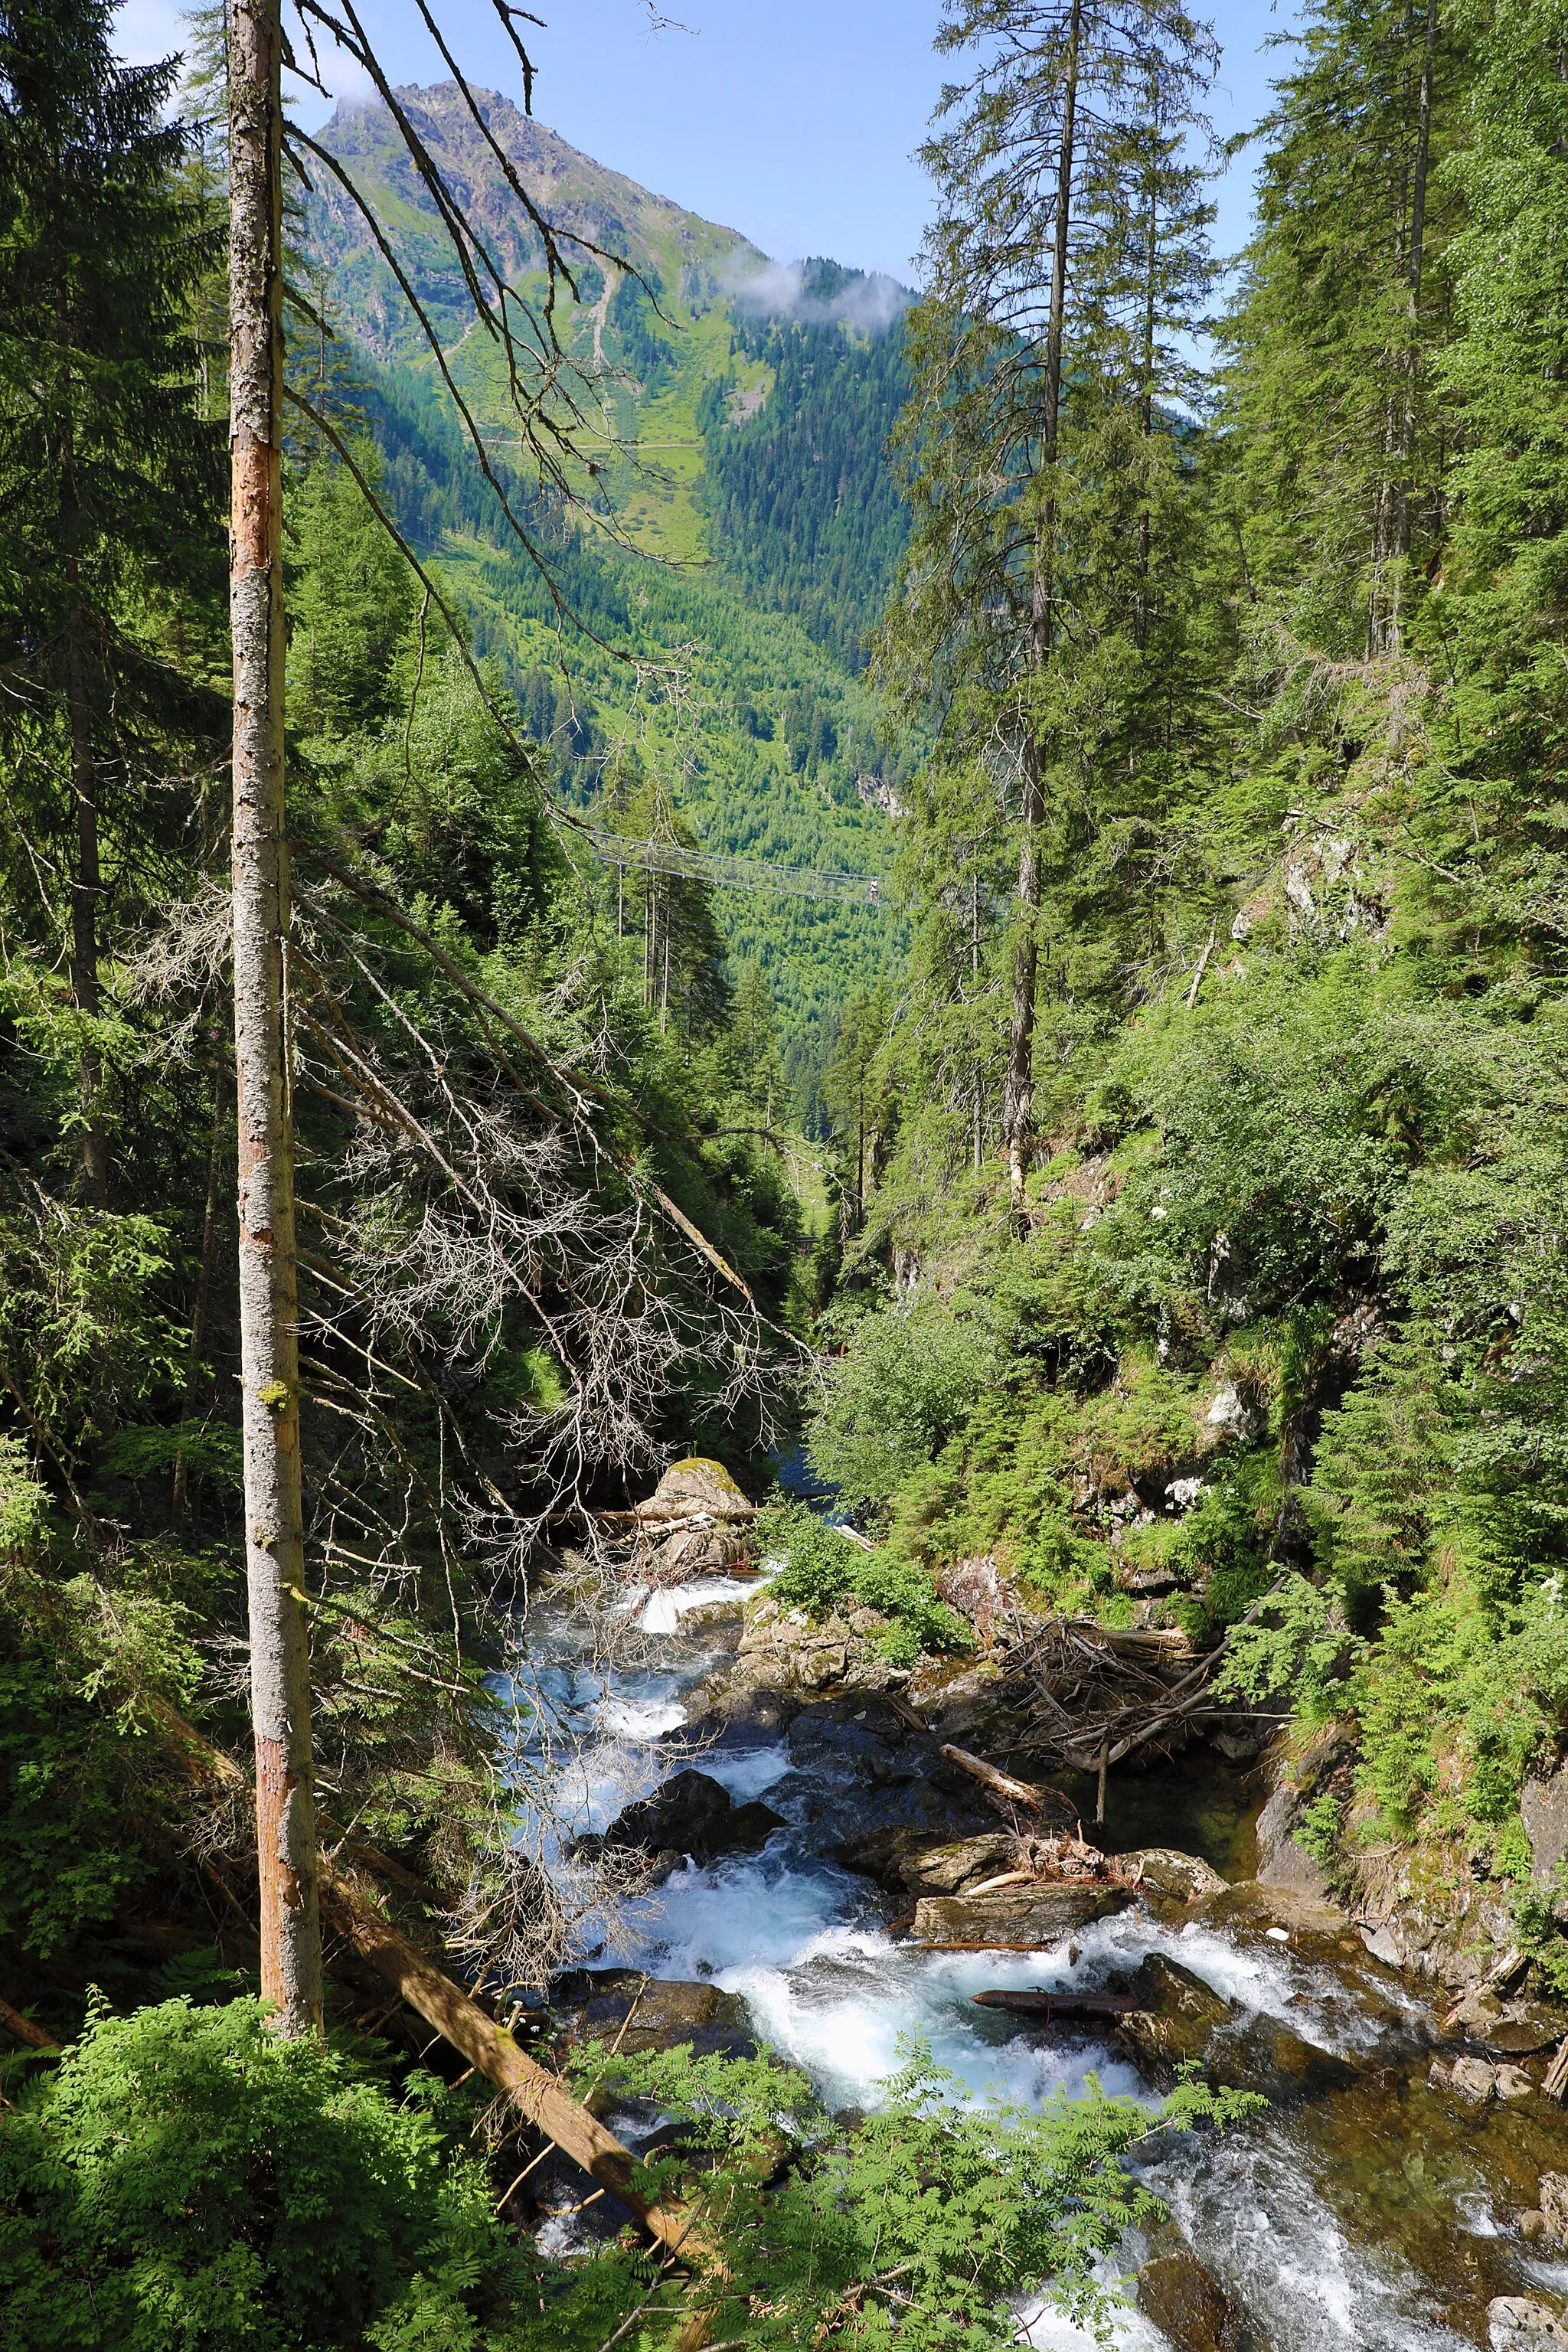 Photo showing: The Riesach Falls in the Schladminger Tauern, Austria.